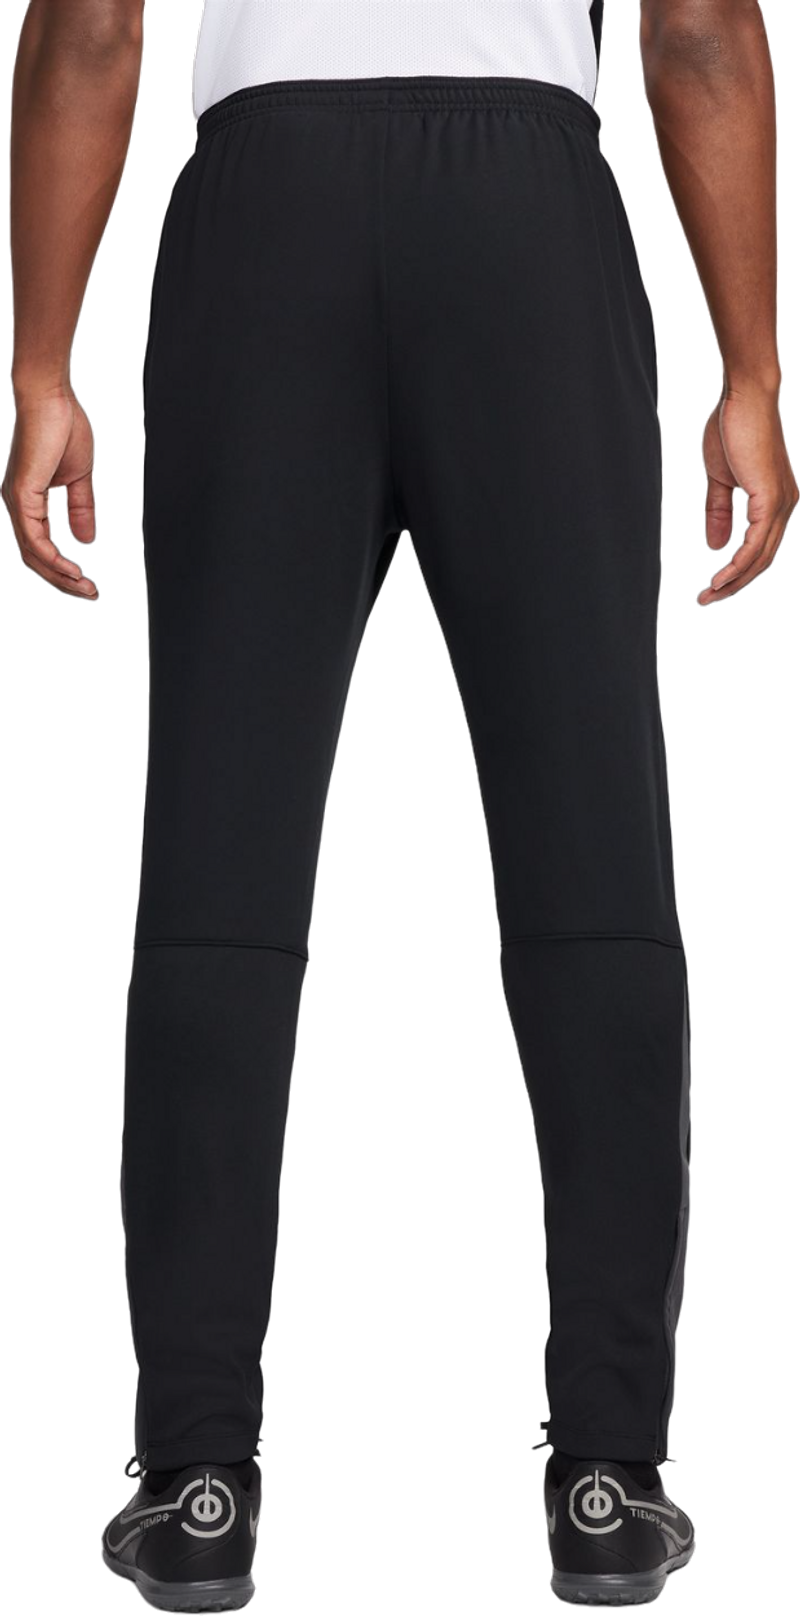 Best price for NIKE Therma-FIT Essential Pants (Tights and trousers/pants), Trakks Outdoor at TraKKs eShop, the Running and Outdoor specialist